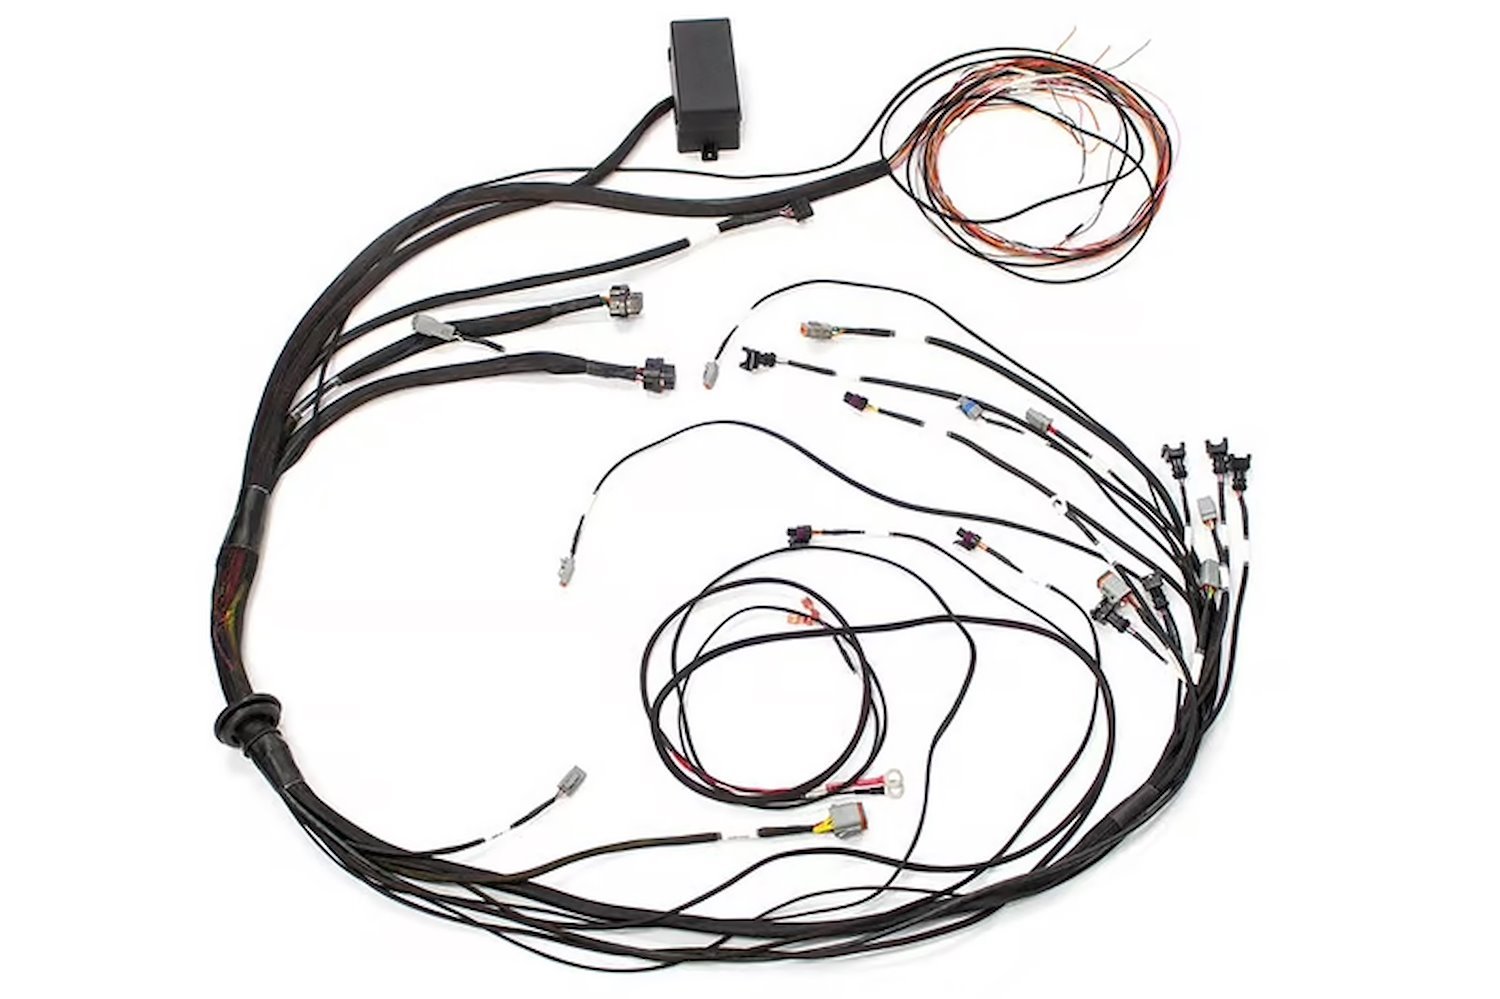 HT-140875 Elite 1000/1500 S4/5 Terminated Harness Only, Fly Lead Ignition, Mazda 13B